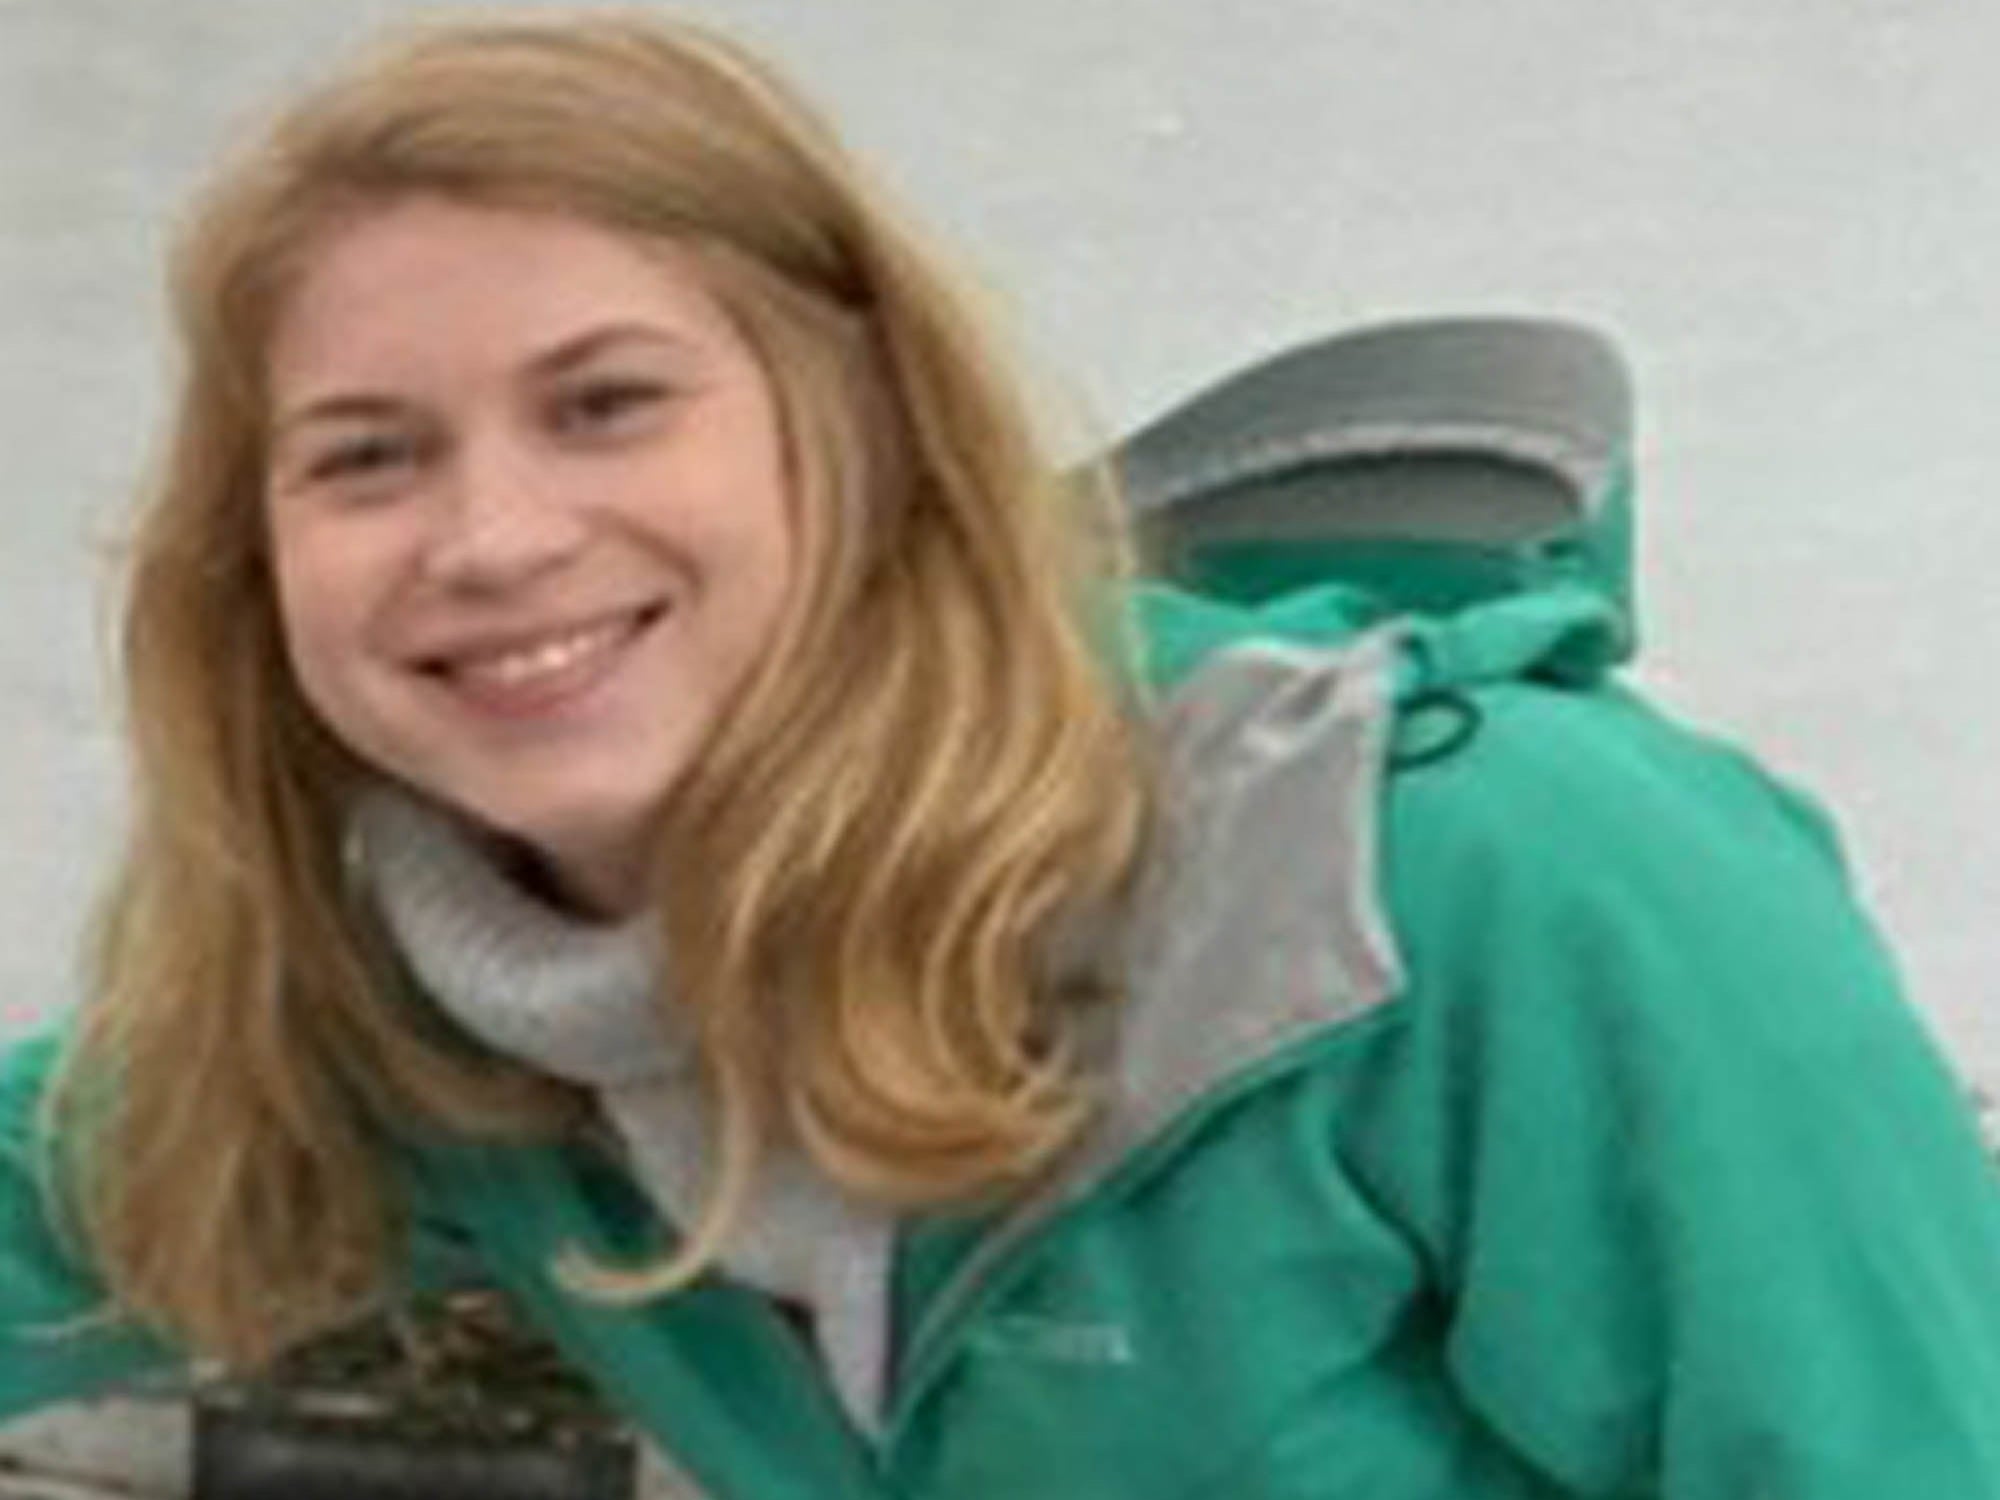 Sarah Everard was wearing the same green coat as in this photo at the time she disappeared